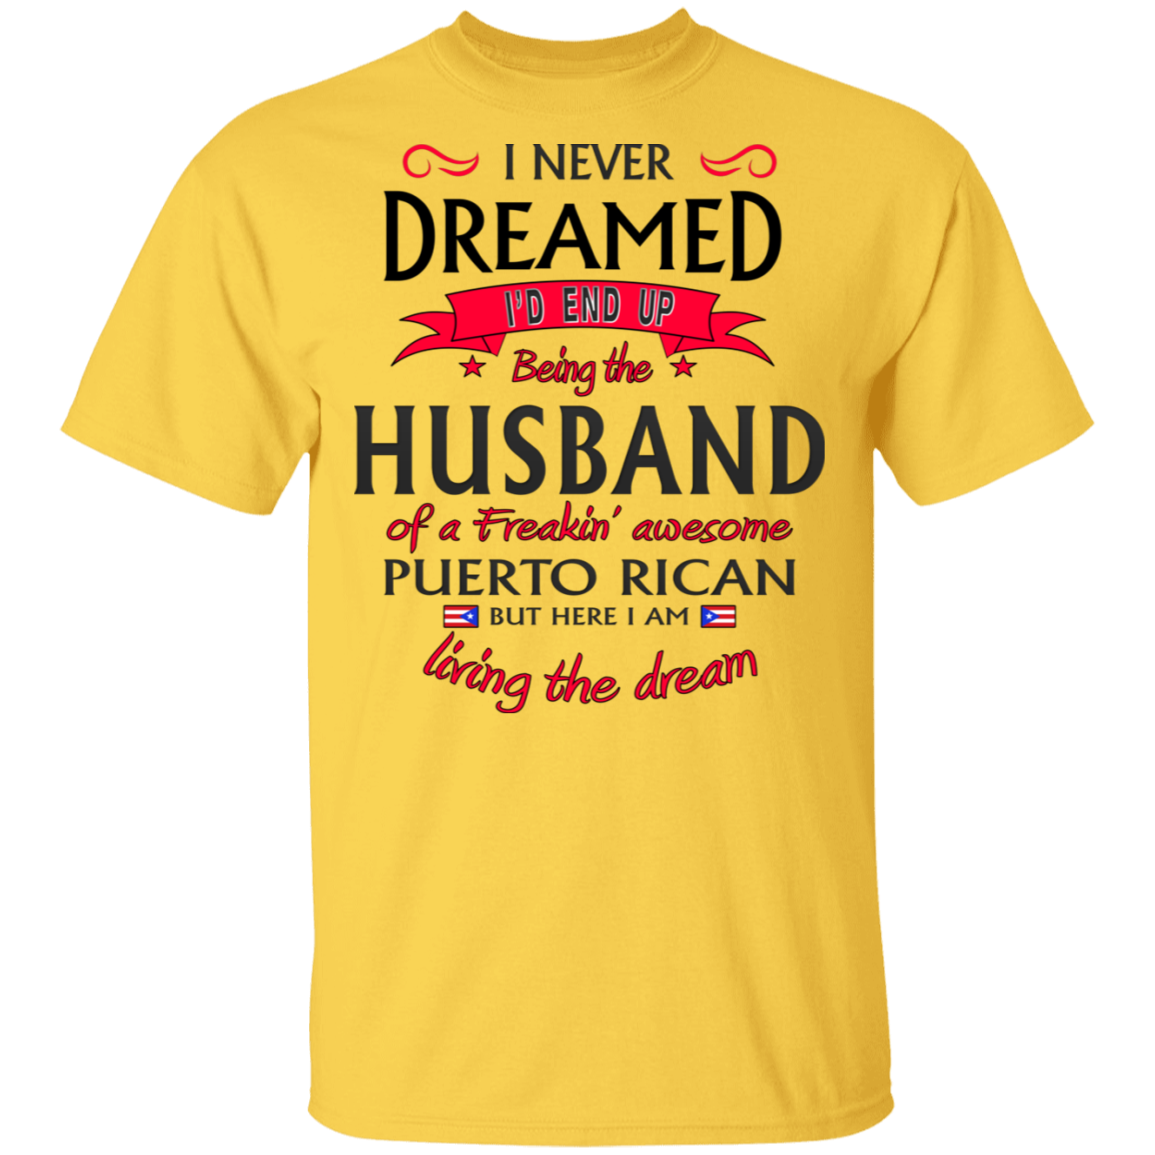 Husband of Awesome PR 5.3 oz. T-Shirt - Puerto Rican Pride